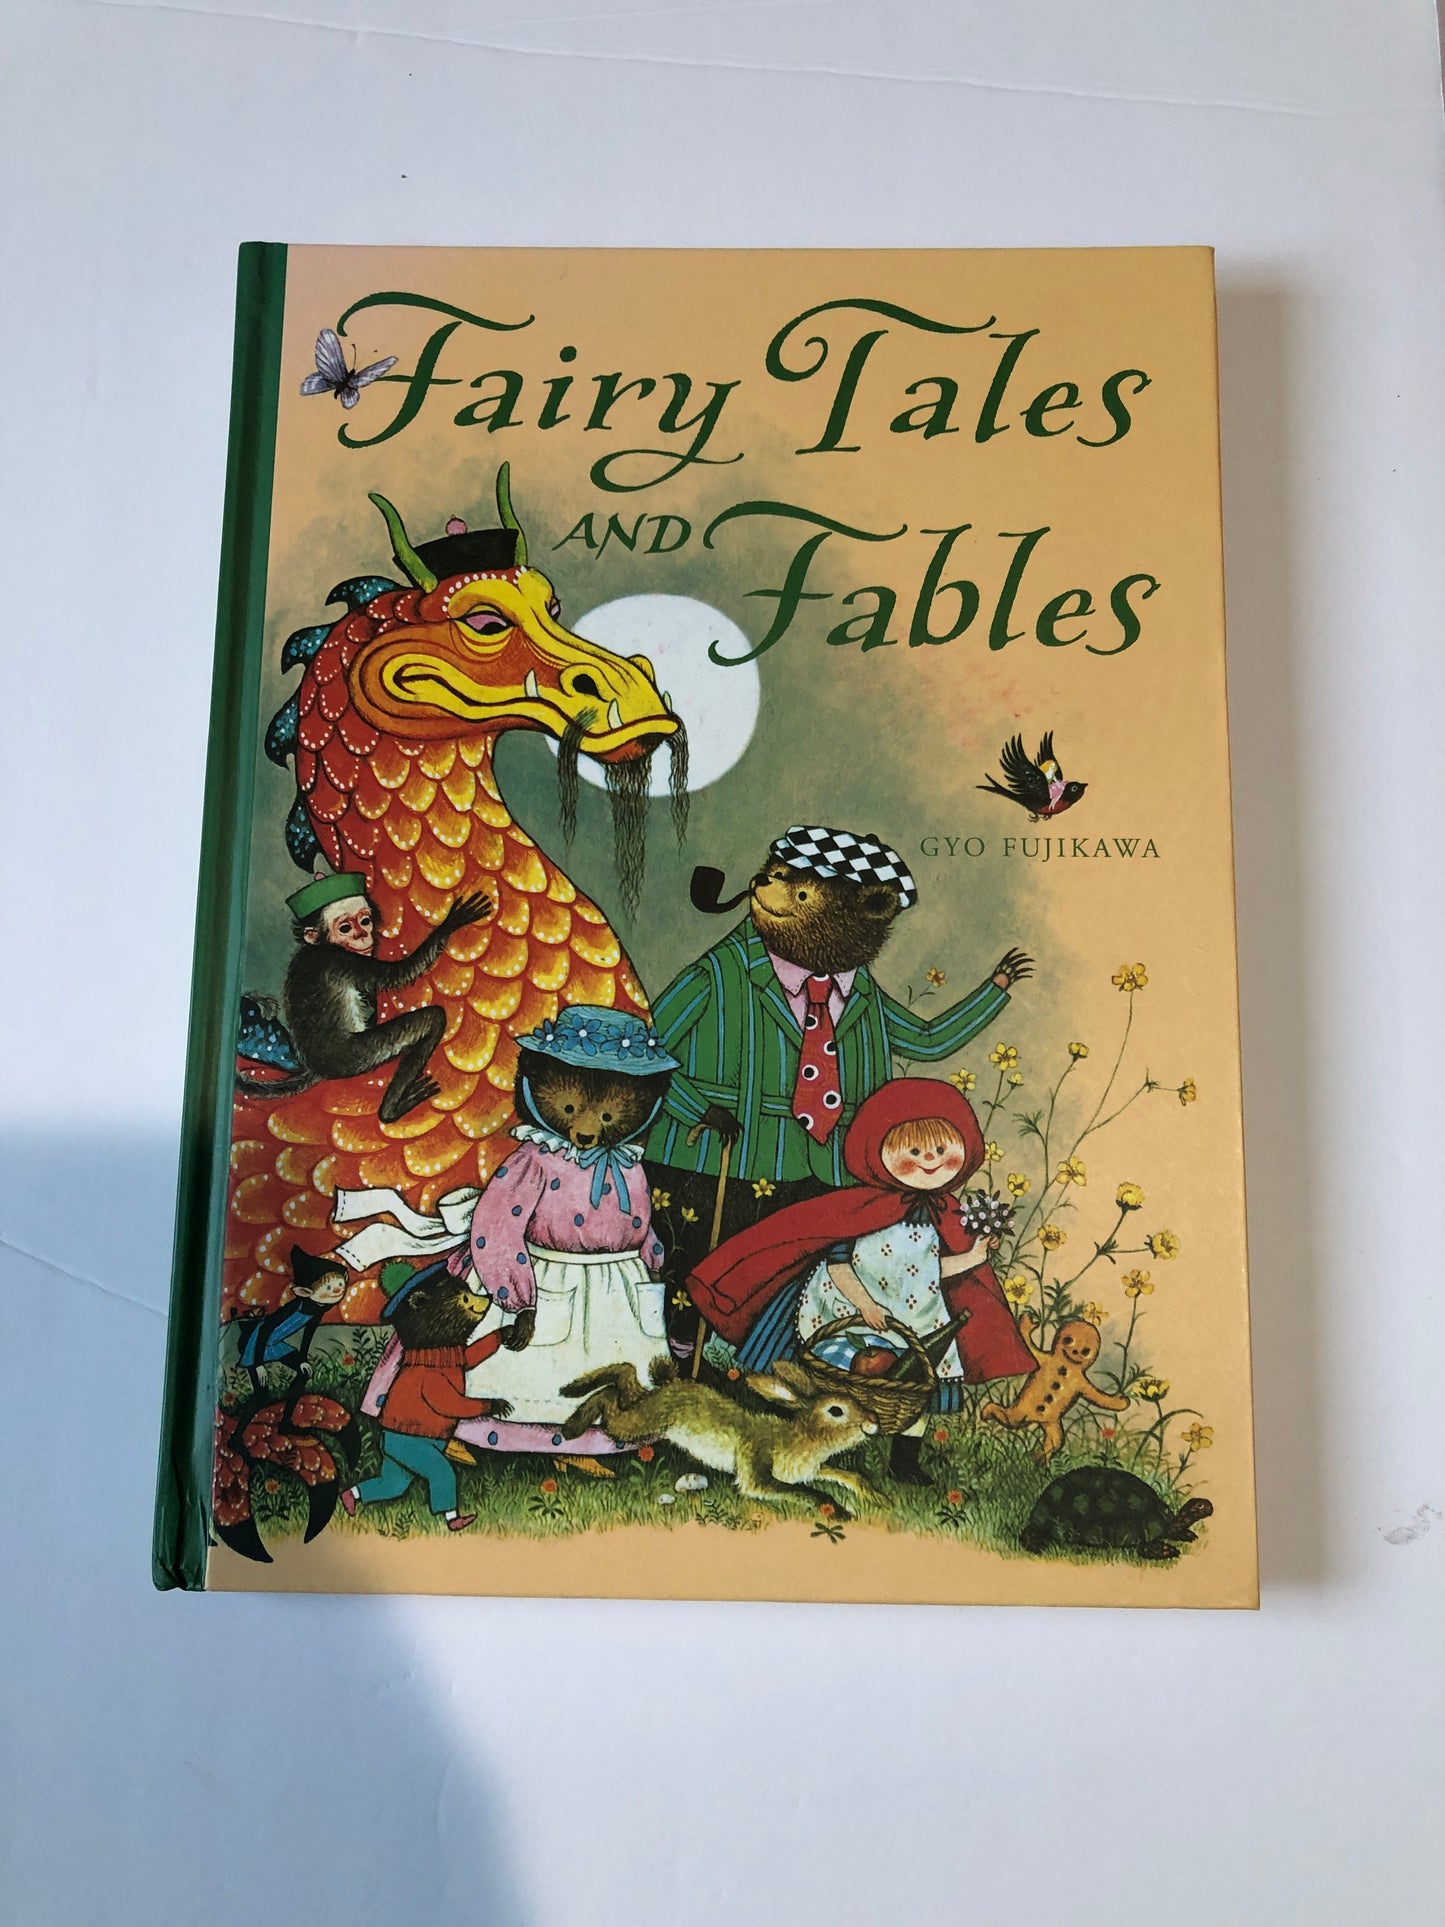 Fairytales and fables book hardcover